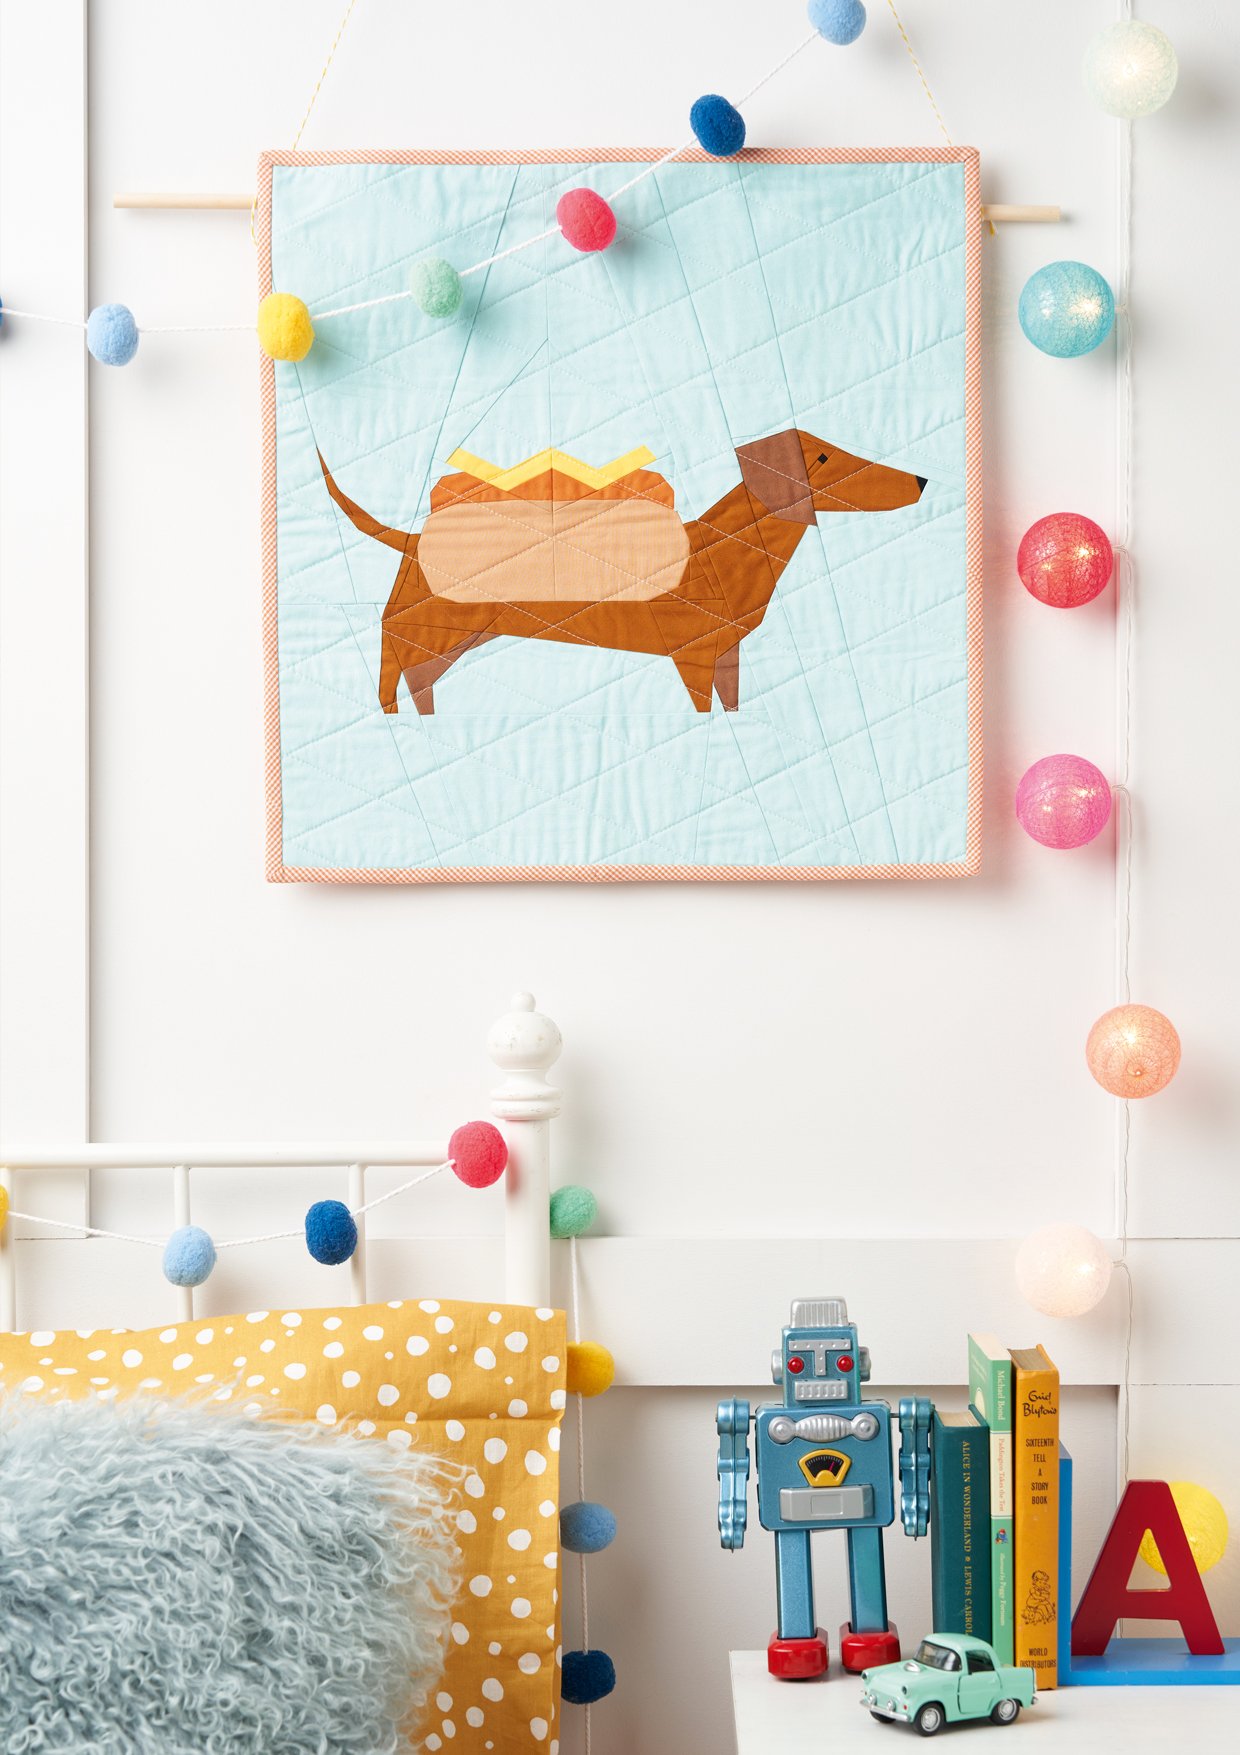 An image of my mini quilt in the shape of an adorable sausage dog, featured in Love, Patchwork & Quilting magazine, issue 126. The project measures 18" x 18" and is filled with vibrant colors and charming details.